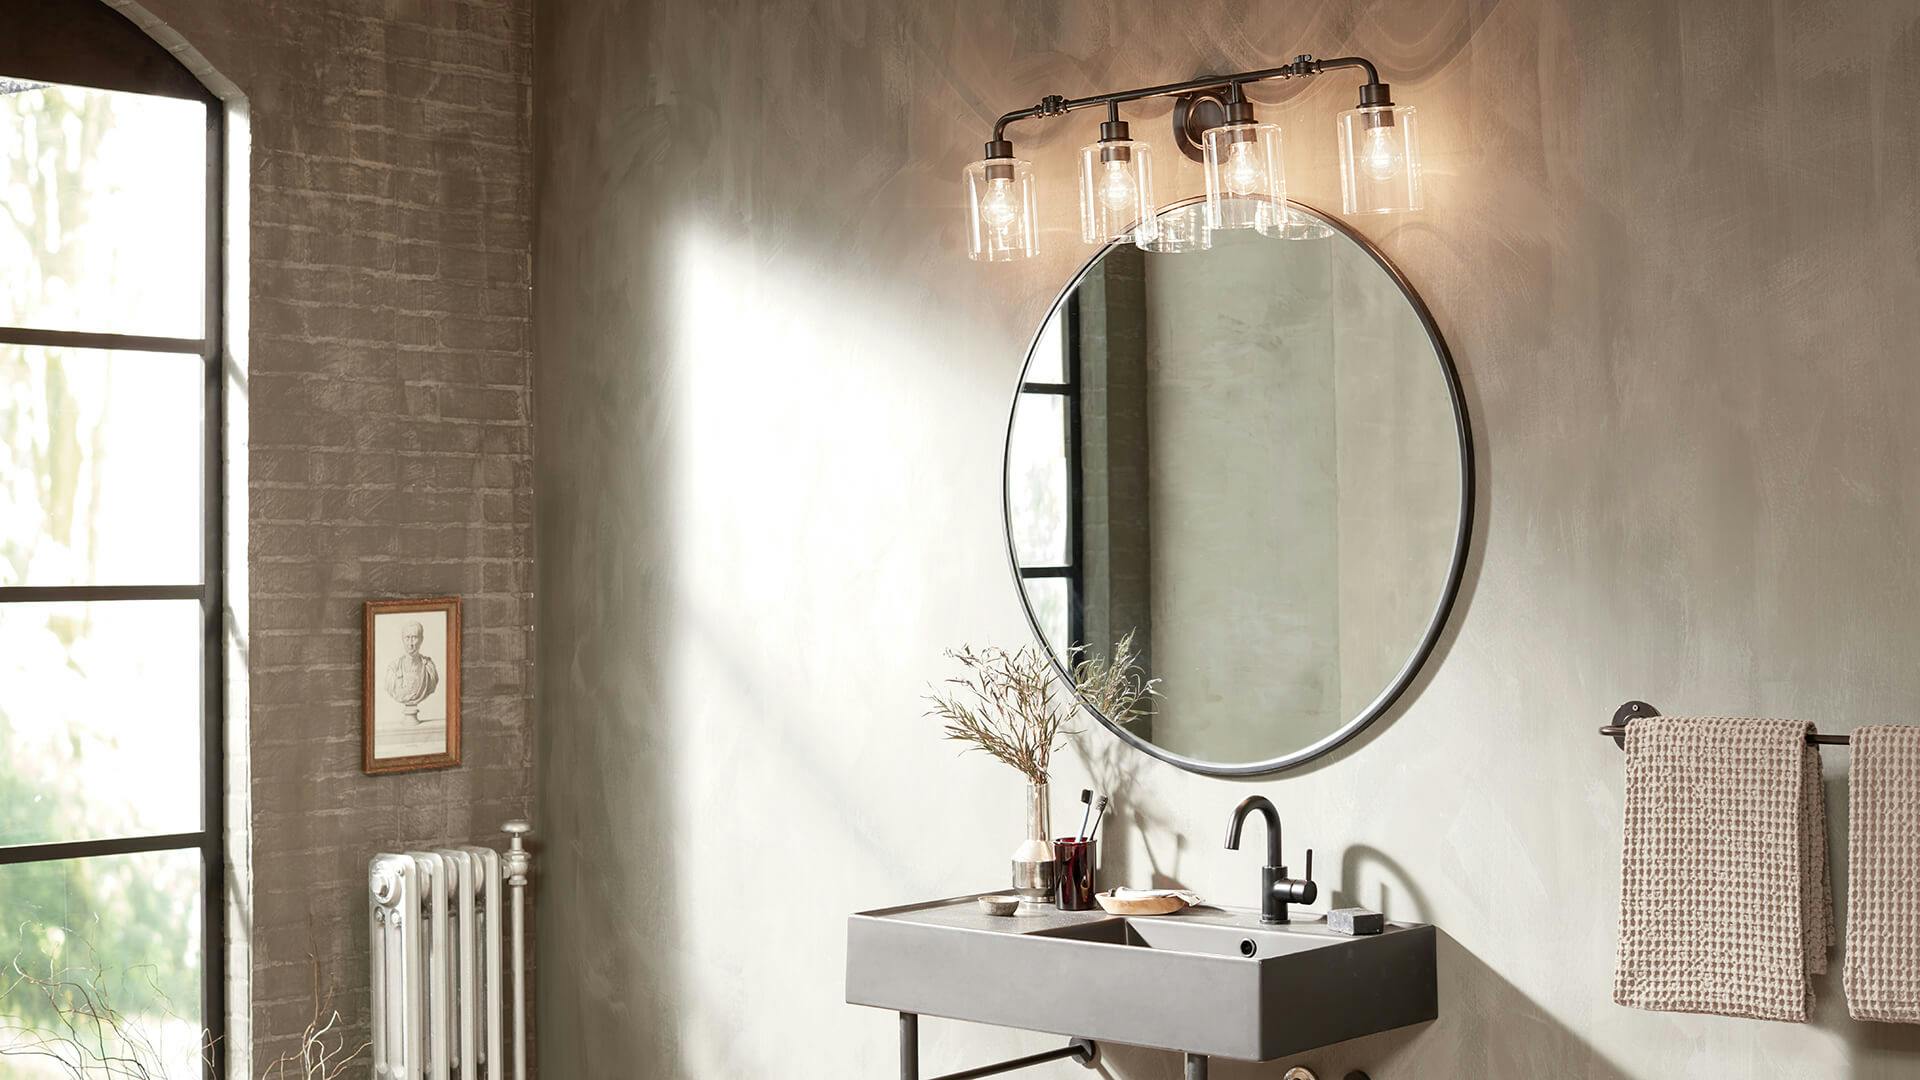 Bathroom with cement walls and floor to ceiling window with light pouring in featuring a Gunnison sconce above a round mirror